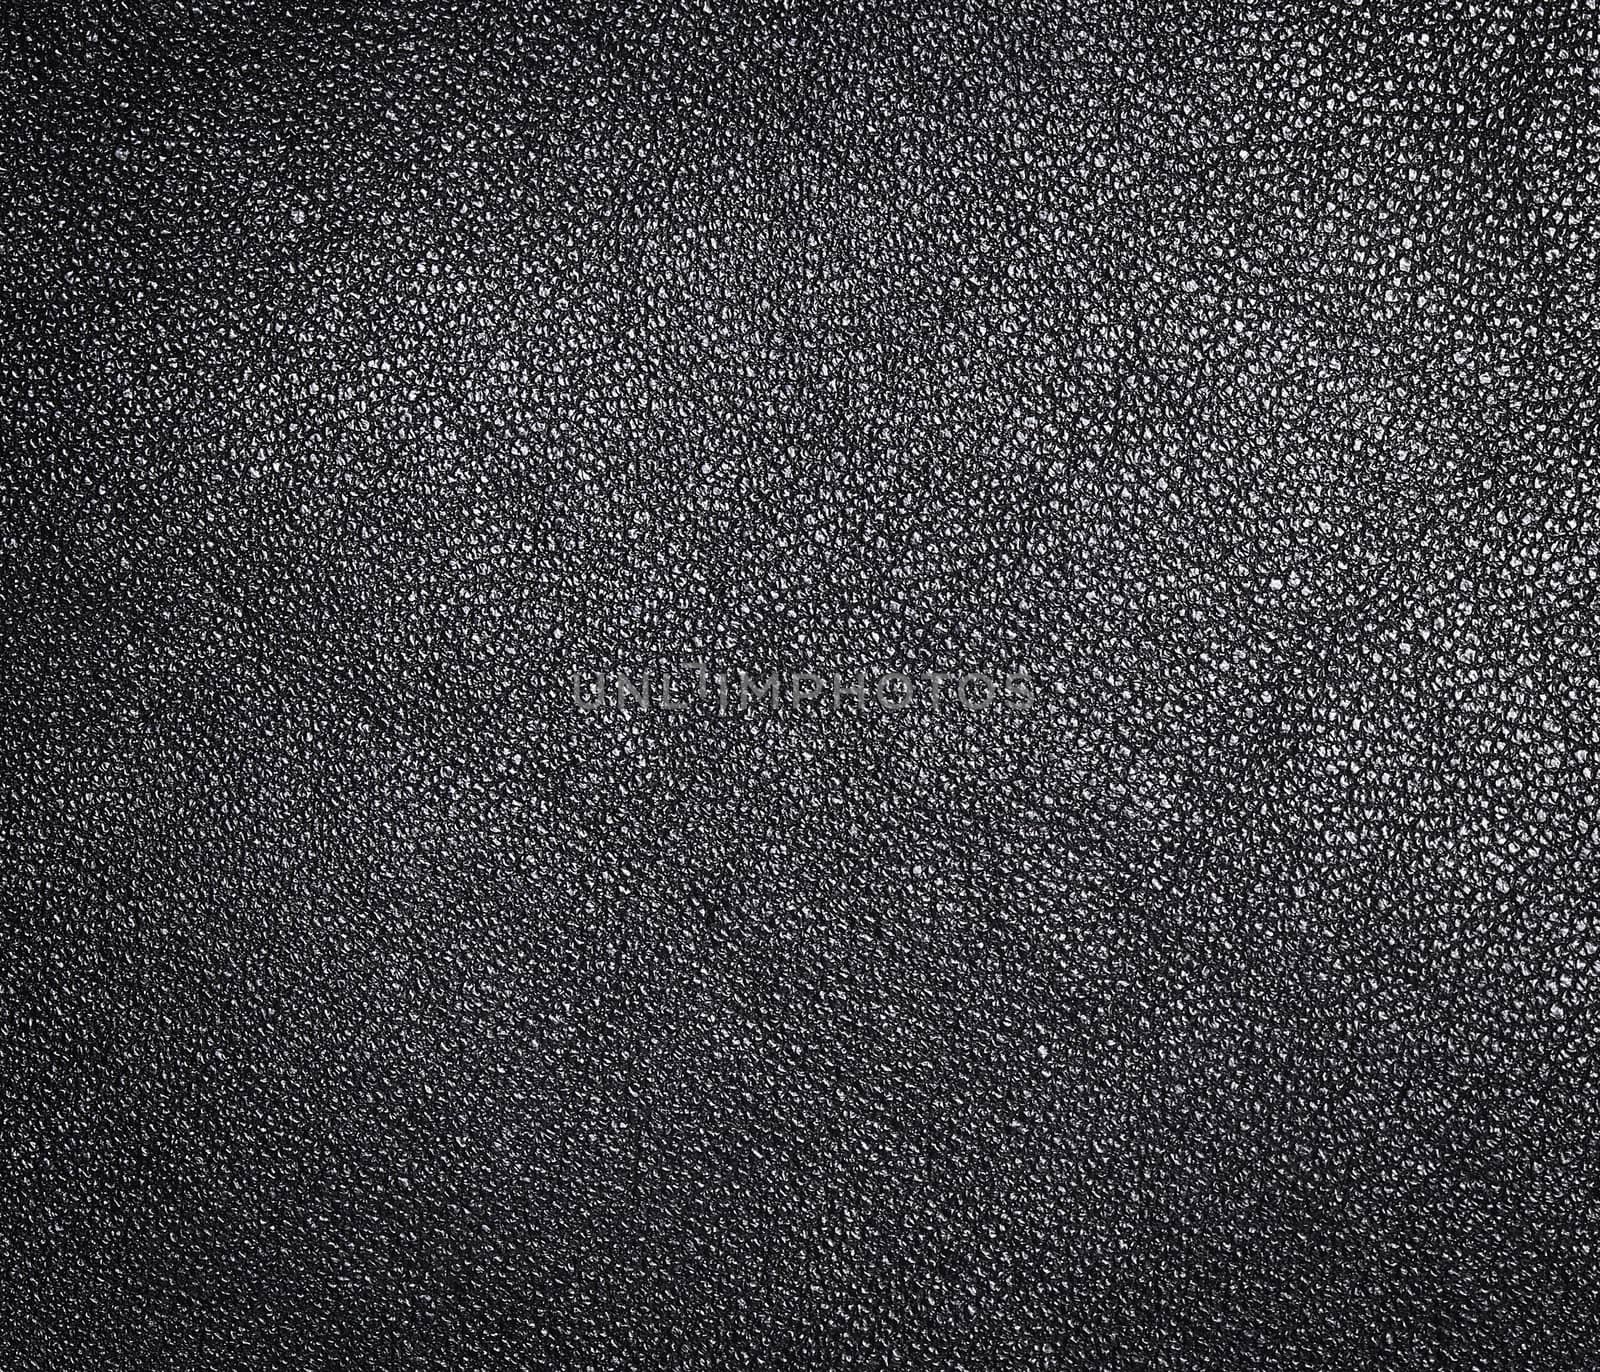 Black leather texture. Clothes background. Close up